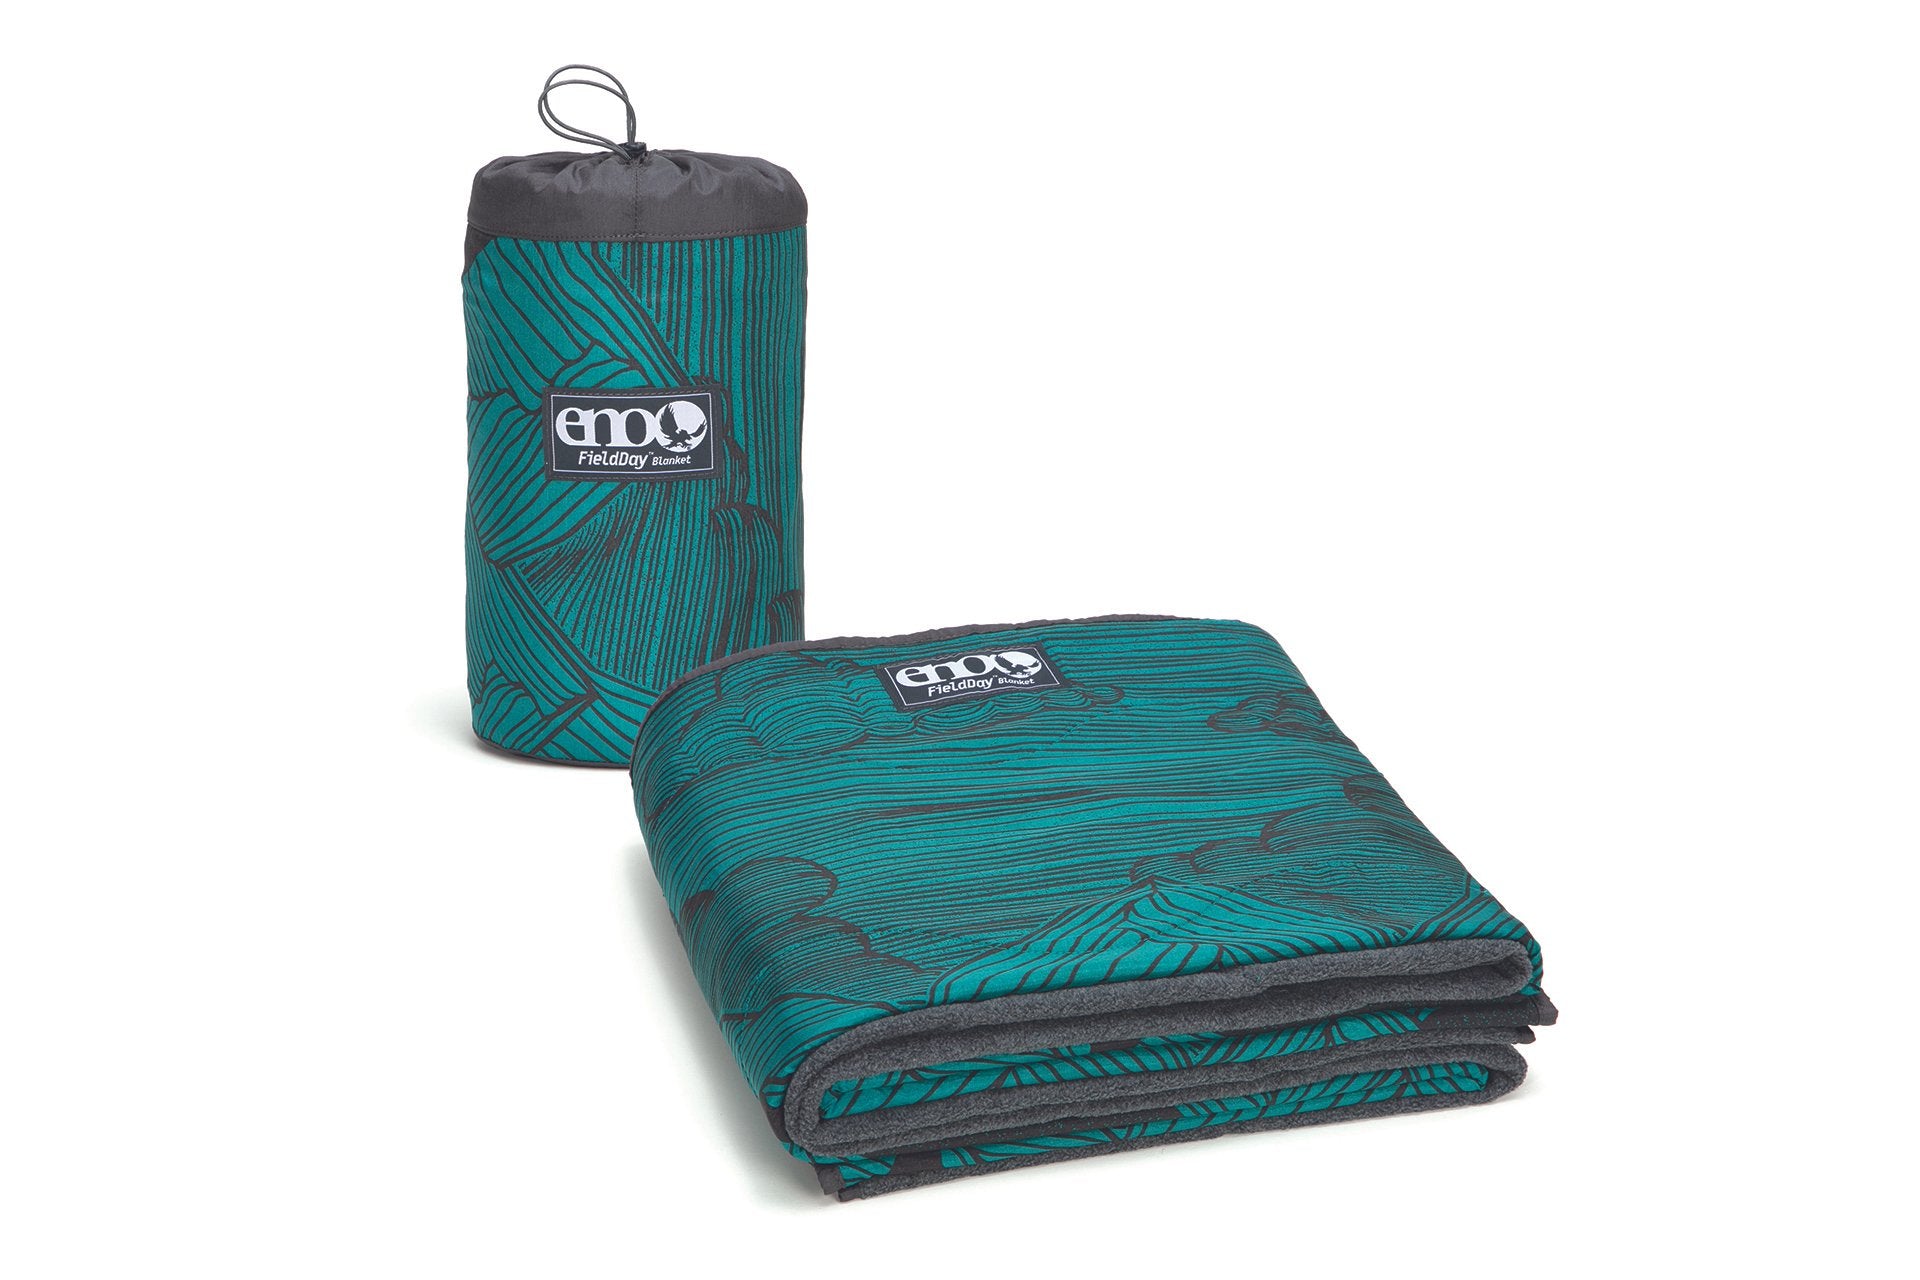 Eagles Nest Outfitters, Inc. Blanket Mountains to Sea ENO FieldDay™ Blanket